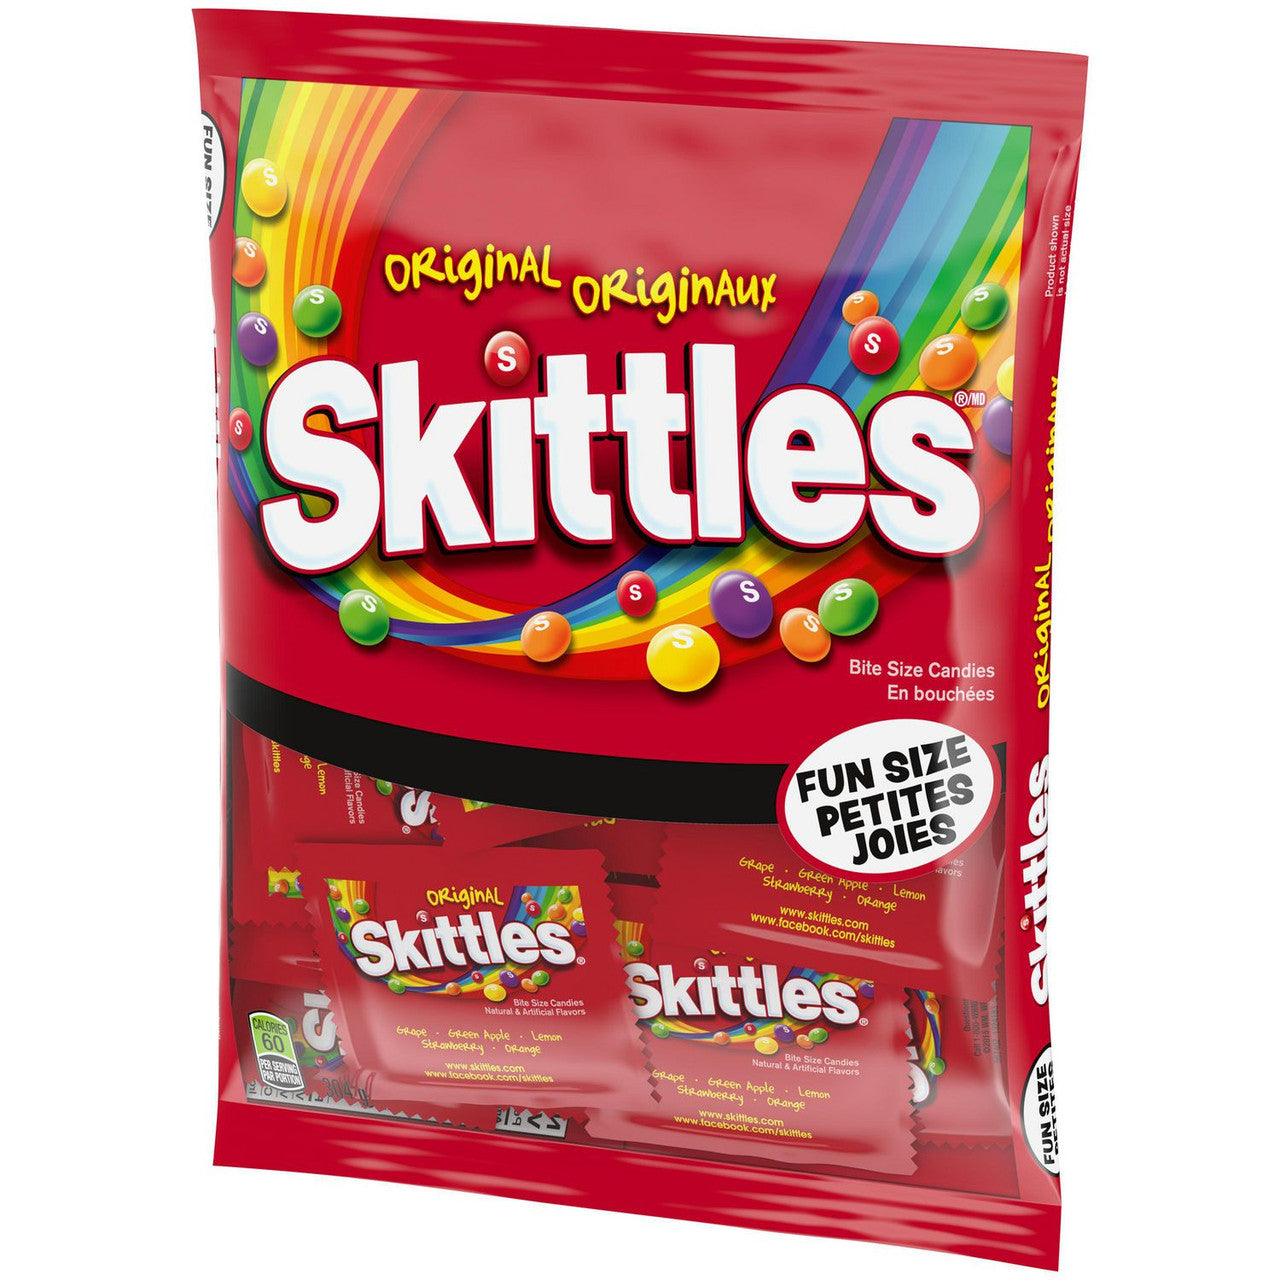 Skittles Original Chewy Candy, Halloween Fun Size Packets, 20ct, 304g/10.6 oz. {Imported from Canada}